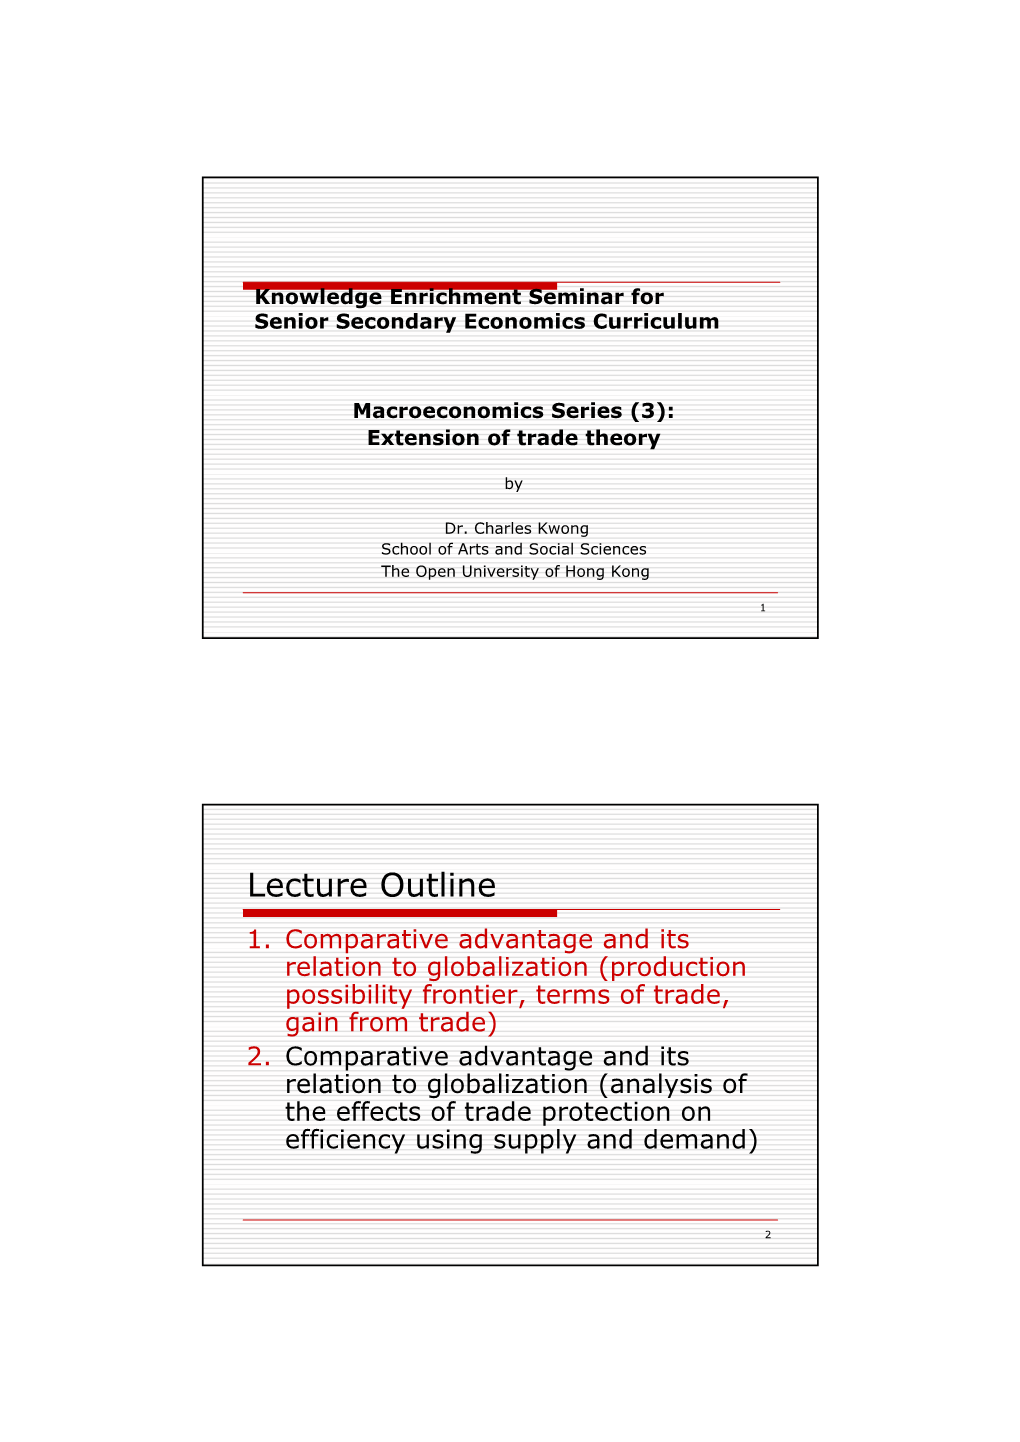 Lecture Outline 1